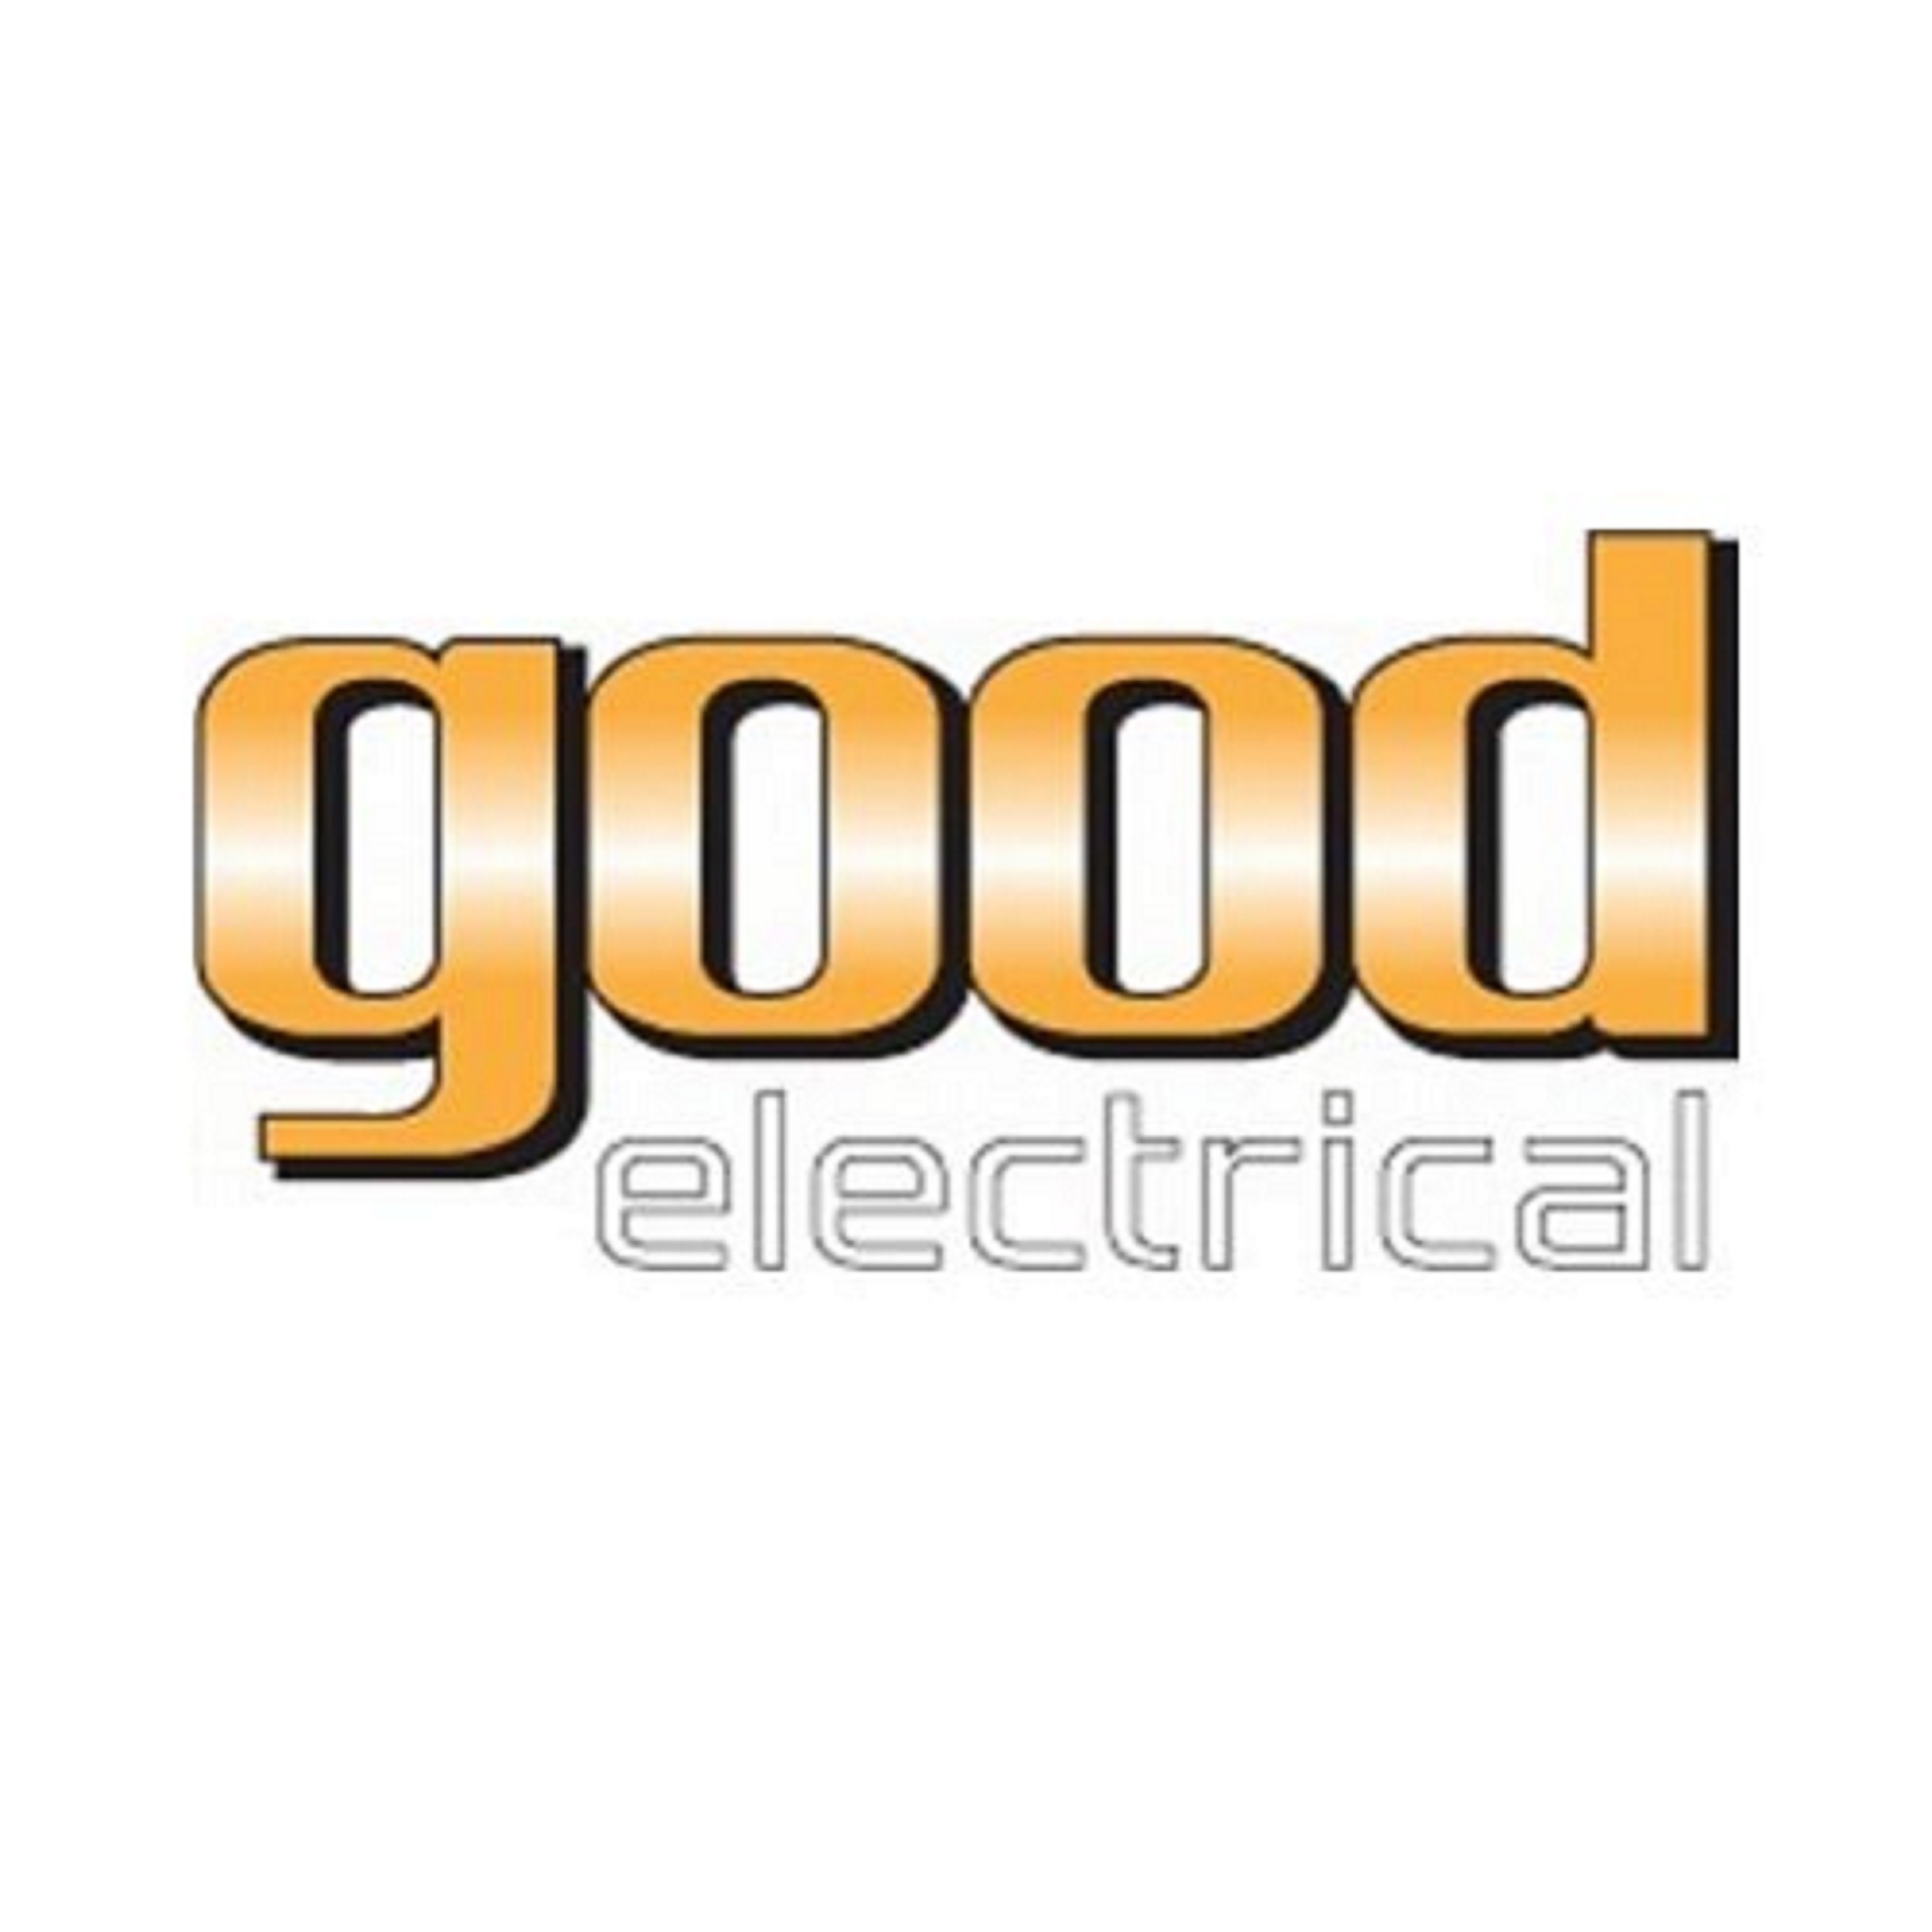 Good Electrical